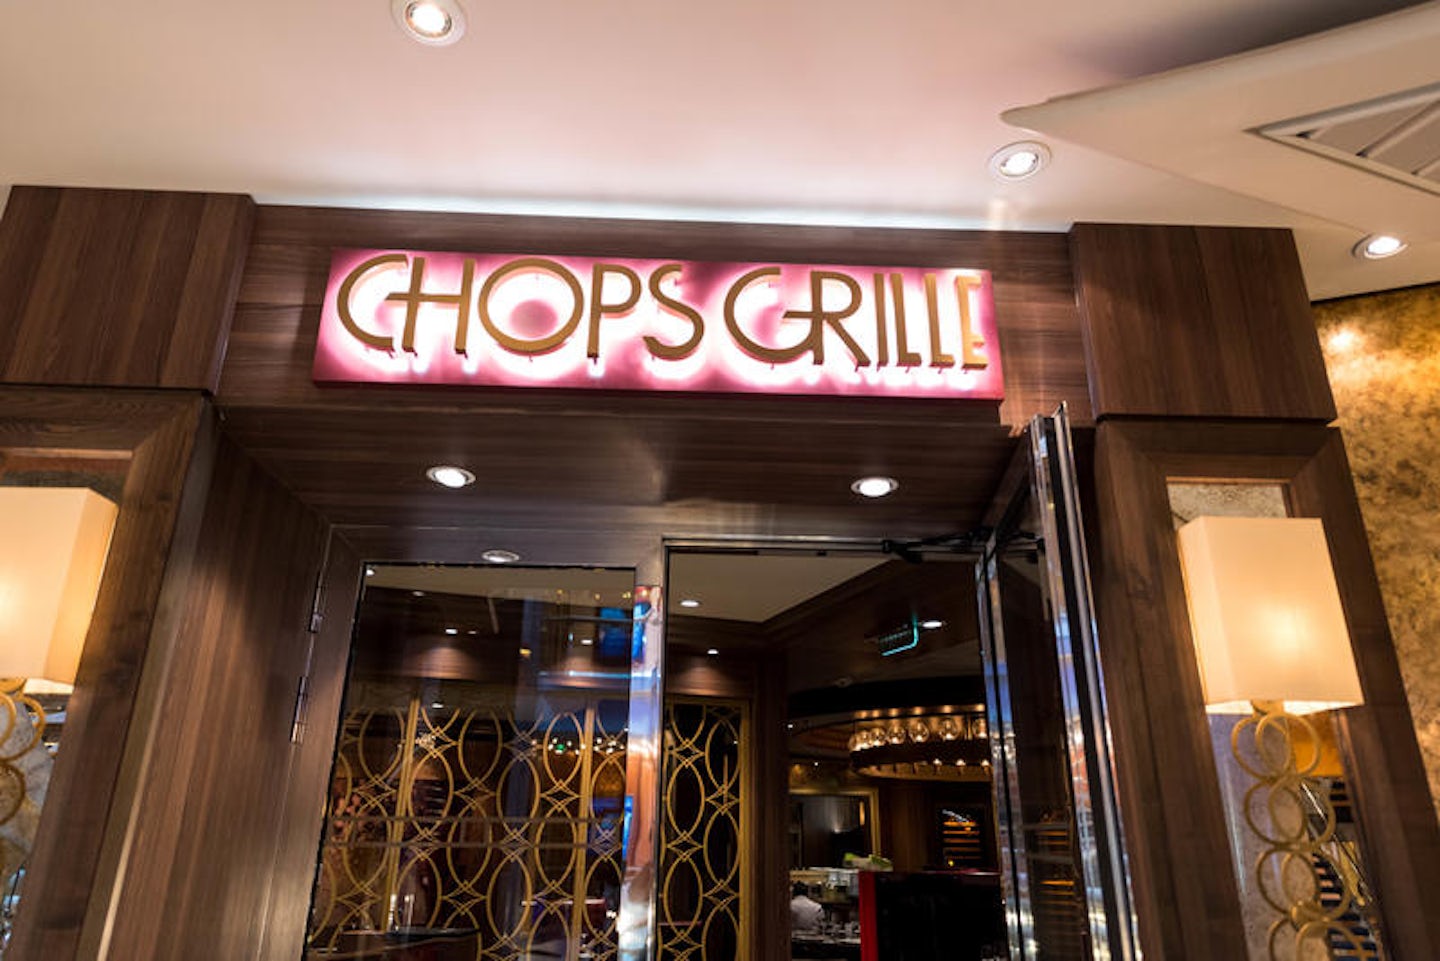 Chops Grille on Adventure of the Seas